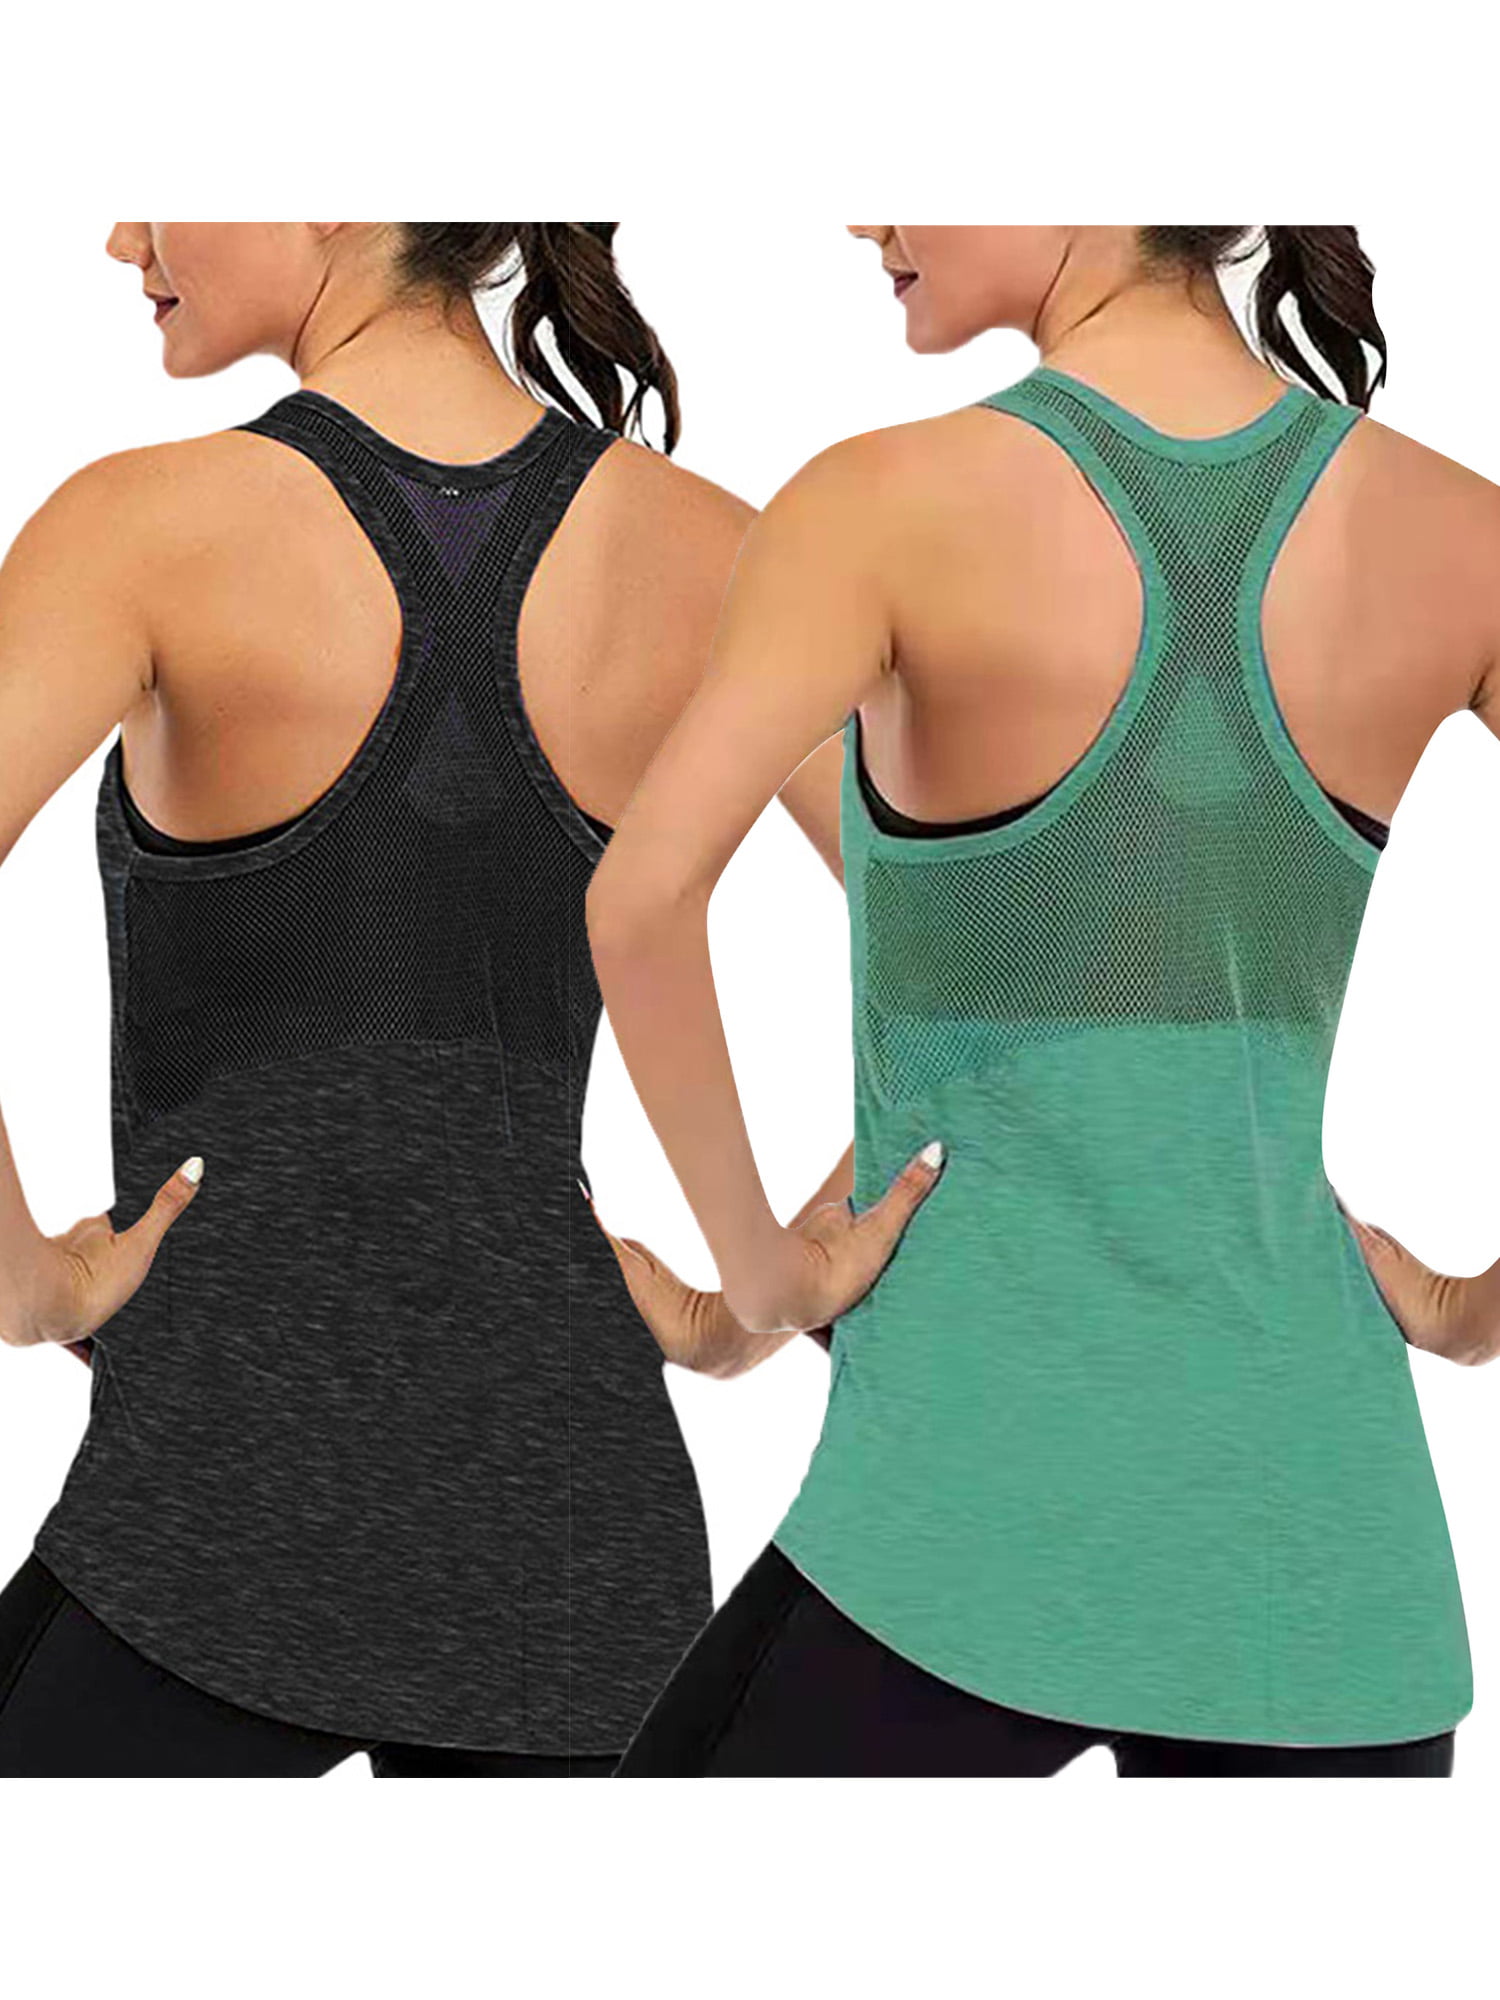 Womens Workout Tank Tops Gym Sleeveless Yoga Shirts Mesh Breathable Sport Tops